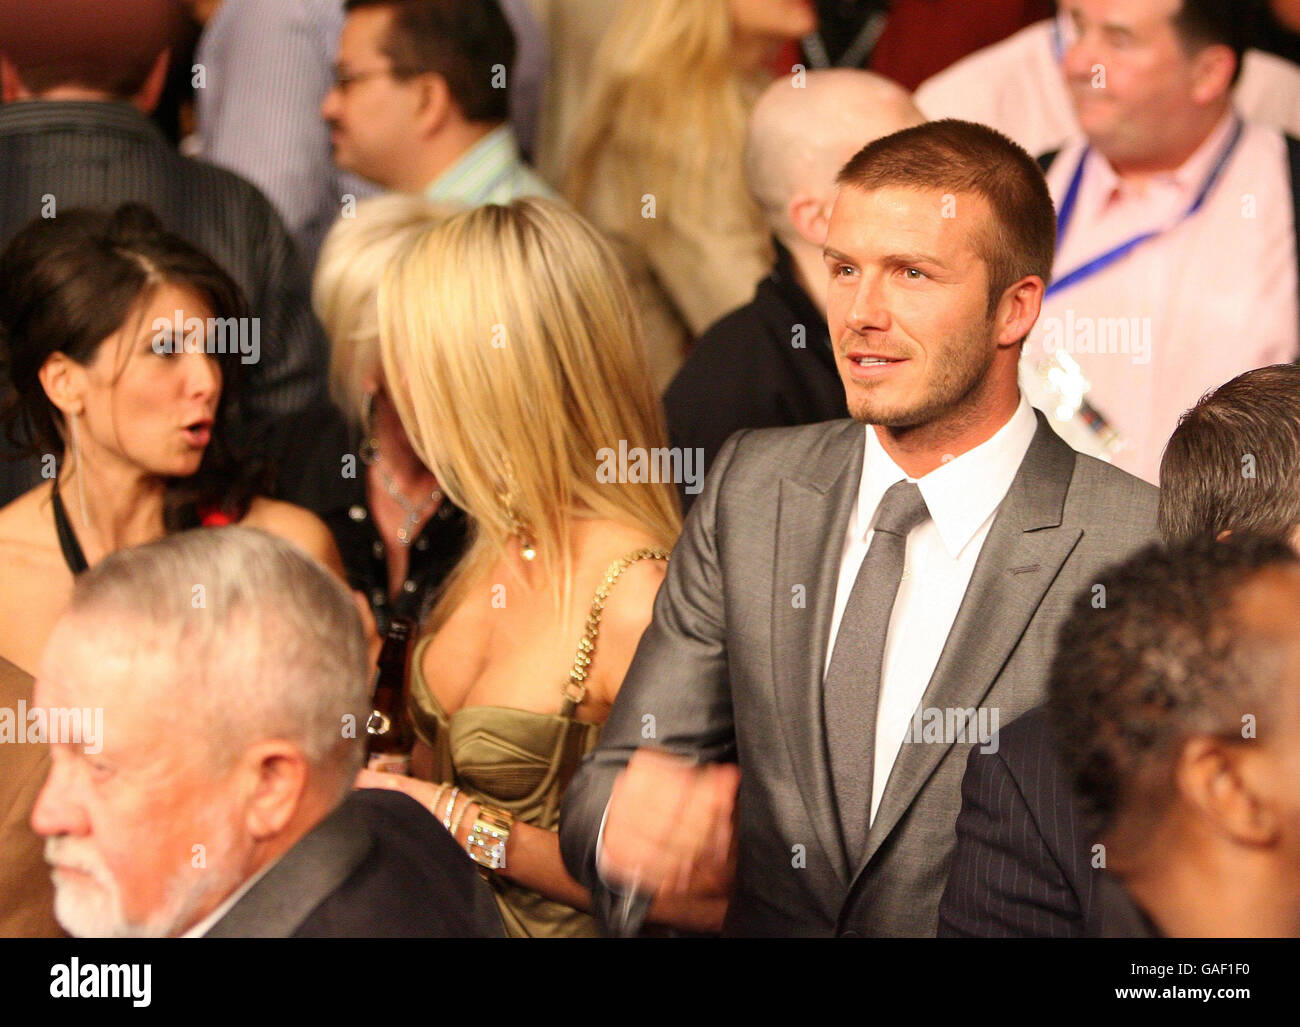 Football player David Beckham watches USAs Floyd Mayweather and Englands Ricky Hatton during the WBC Welterweight Title fight at the MGM Grand Garden Arena, Las Vegas, USA Stock Photo